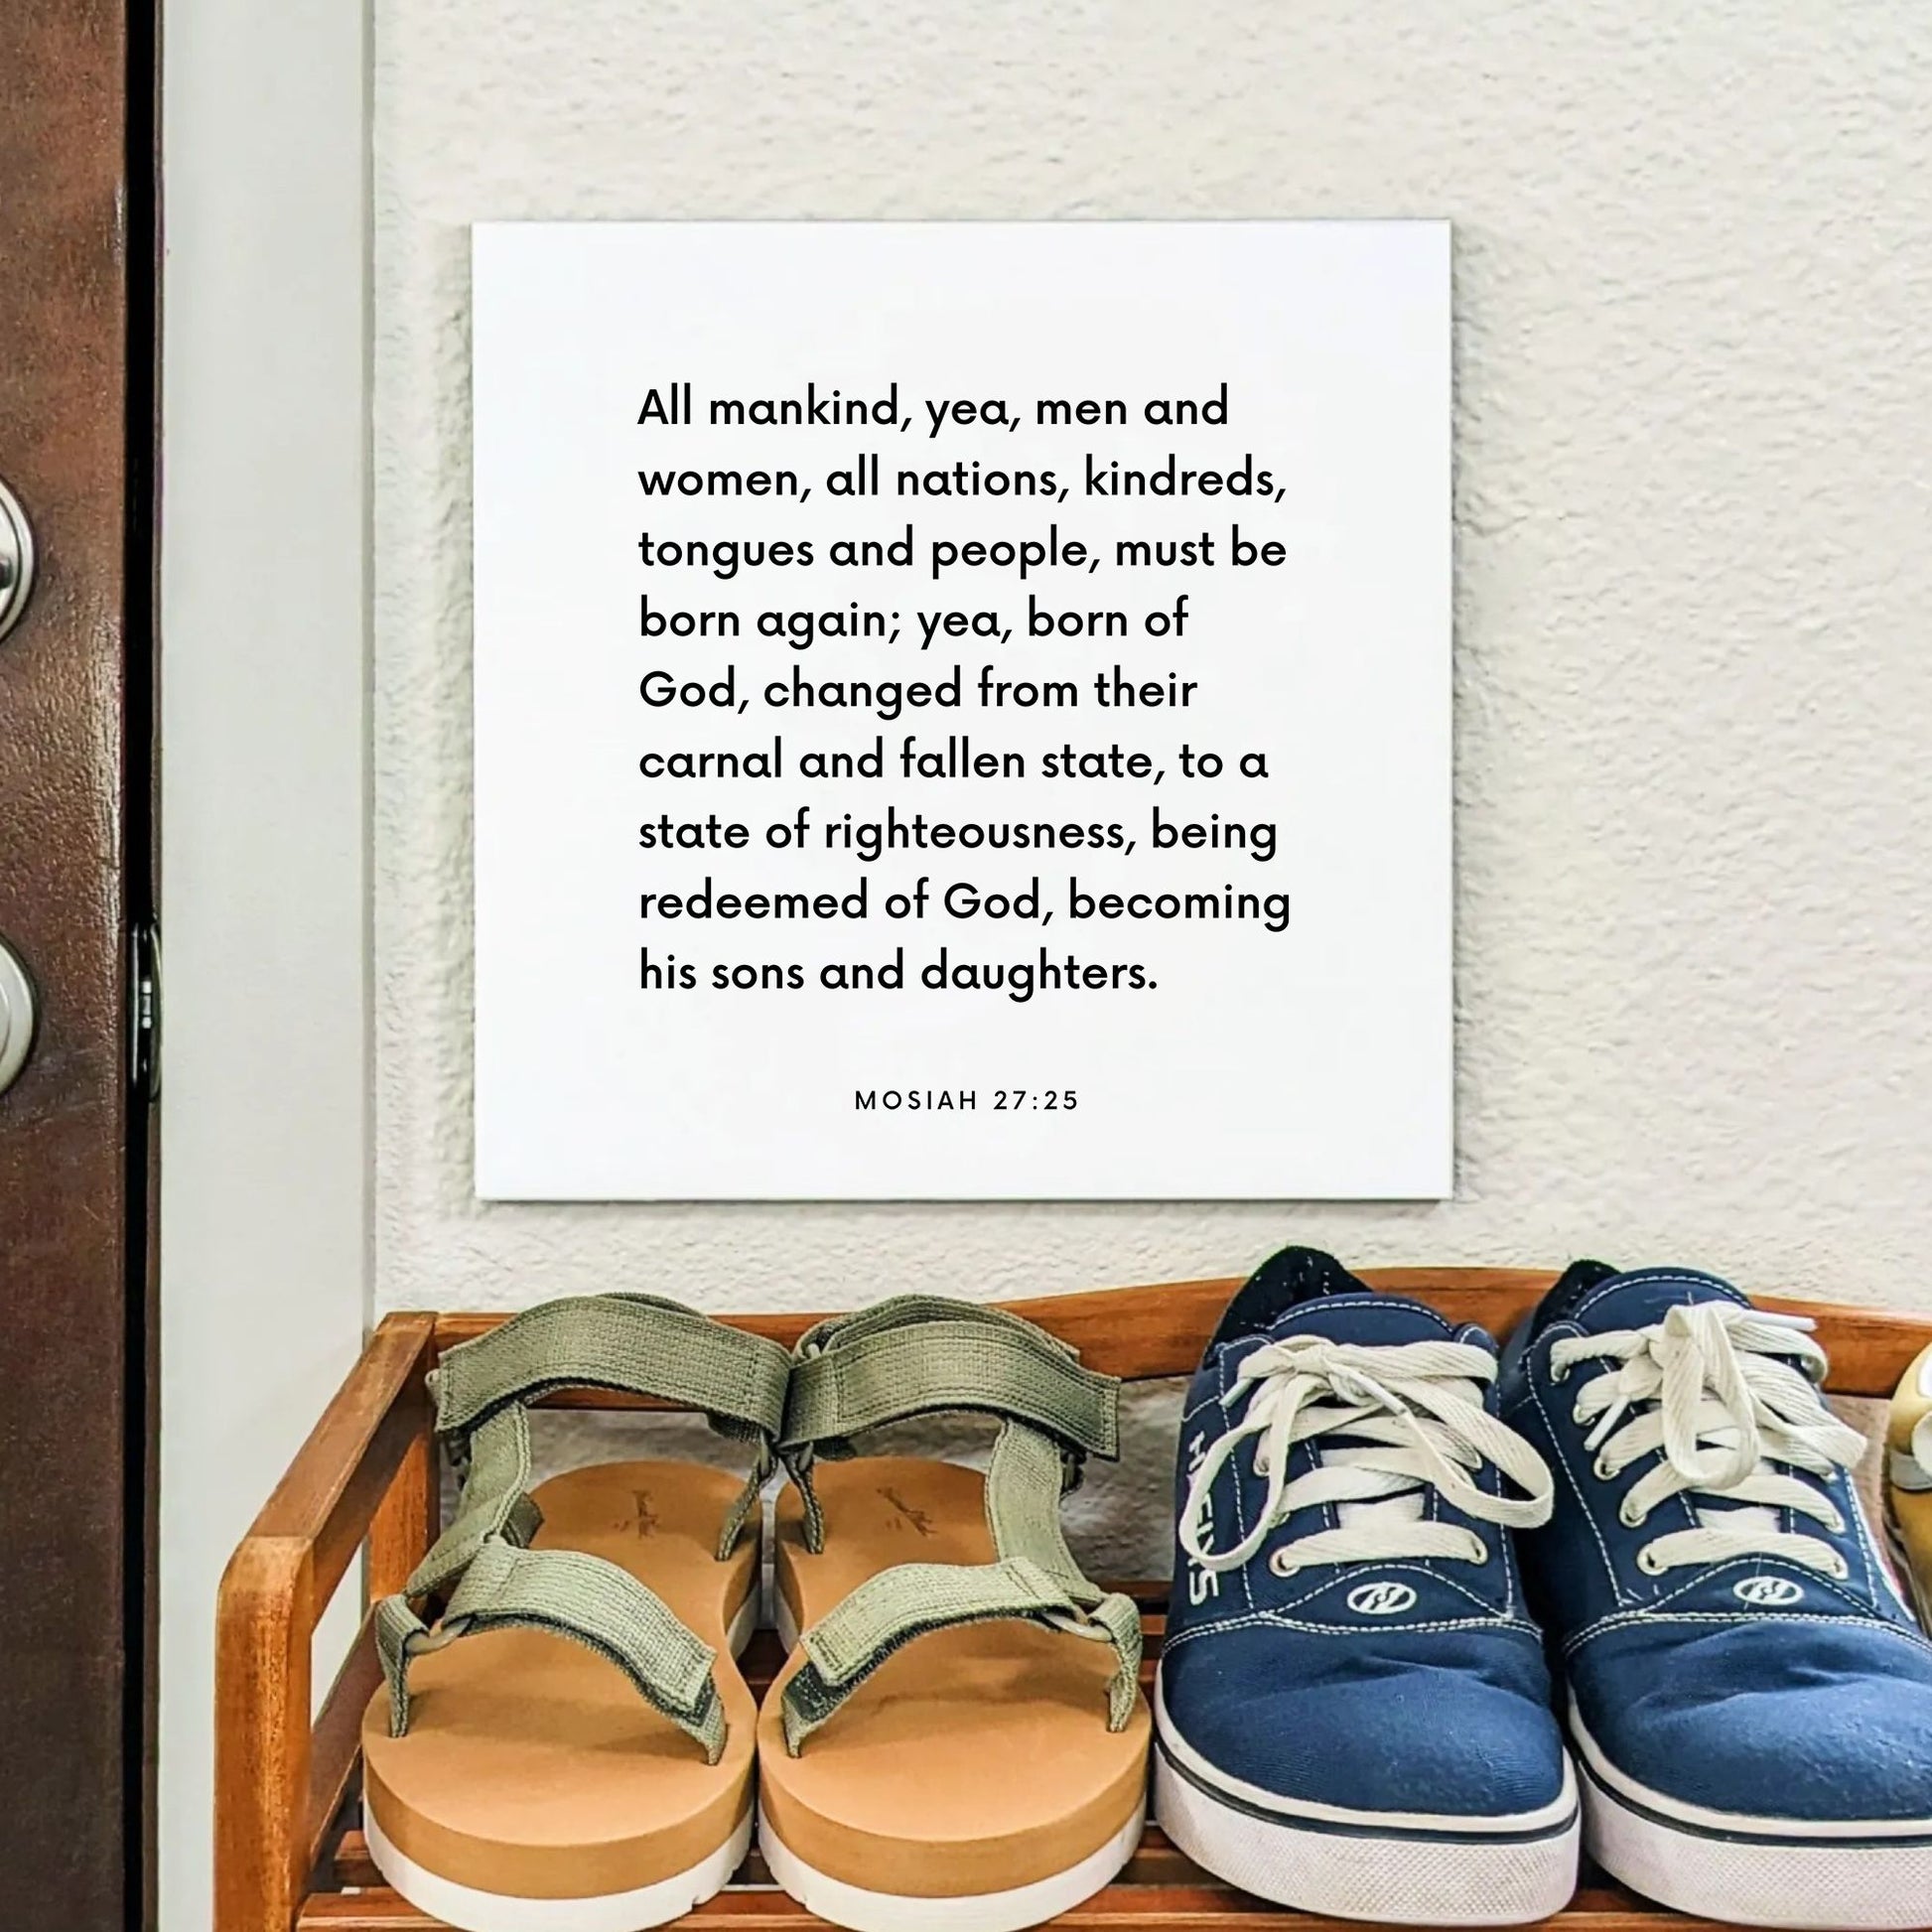 Shoes mouting of the scripture tile for Mosiah 27:25 - "All mankind must be born again"